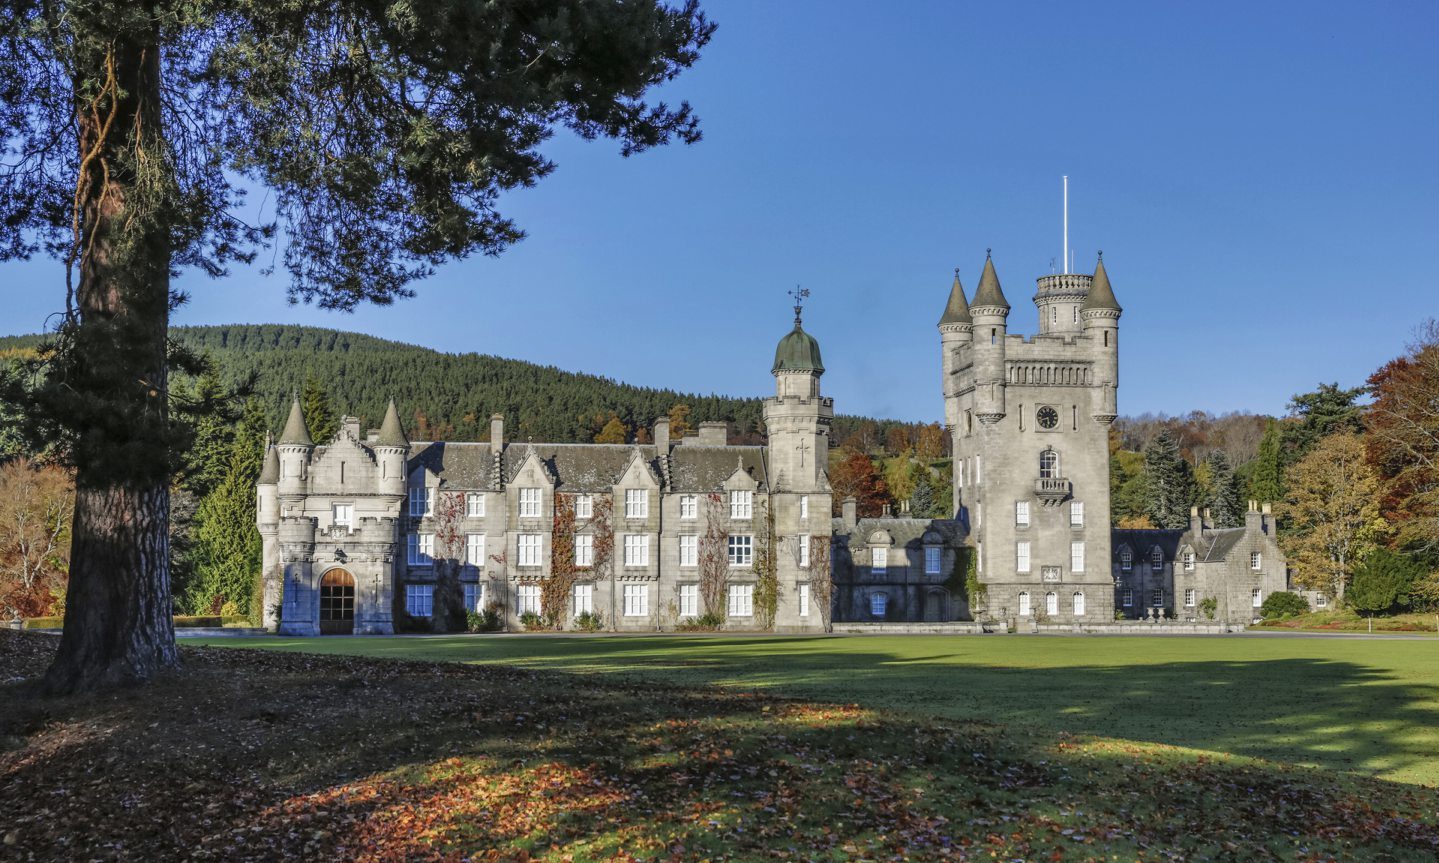 Balmoral Castle is not itself actually in The Crown